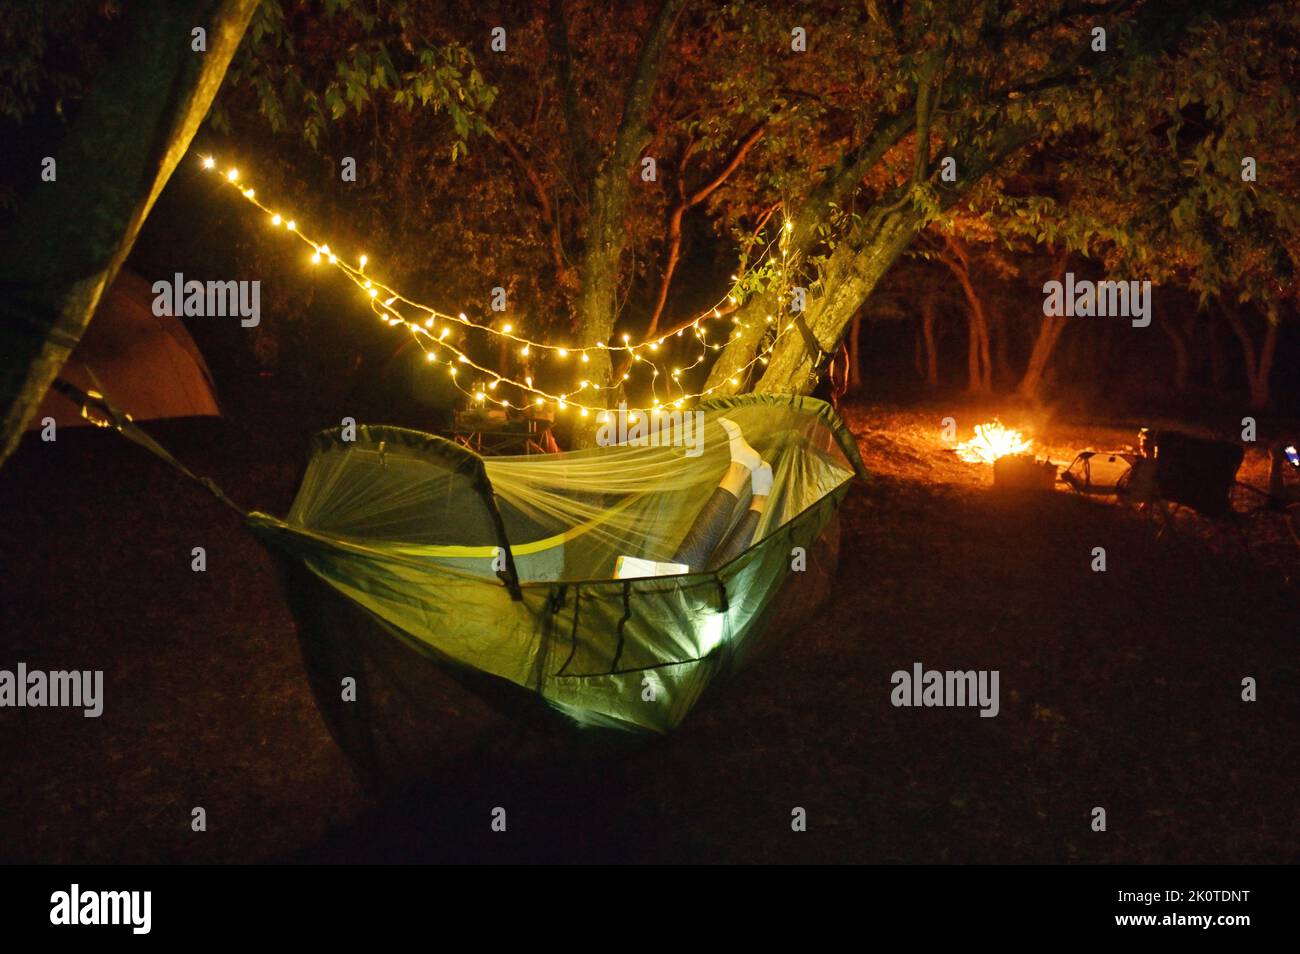 Camping in Night Forest With Sparklers. Woman Lying In Hammock and Campfire Stock Photo